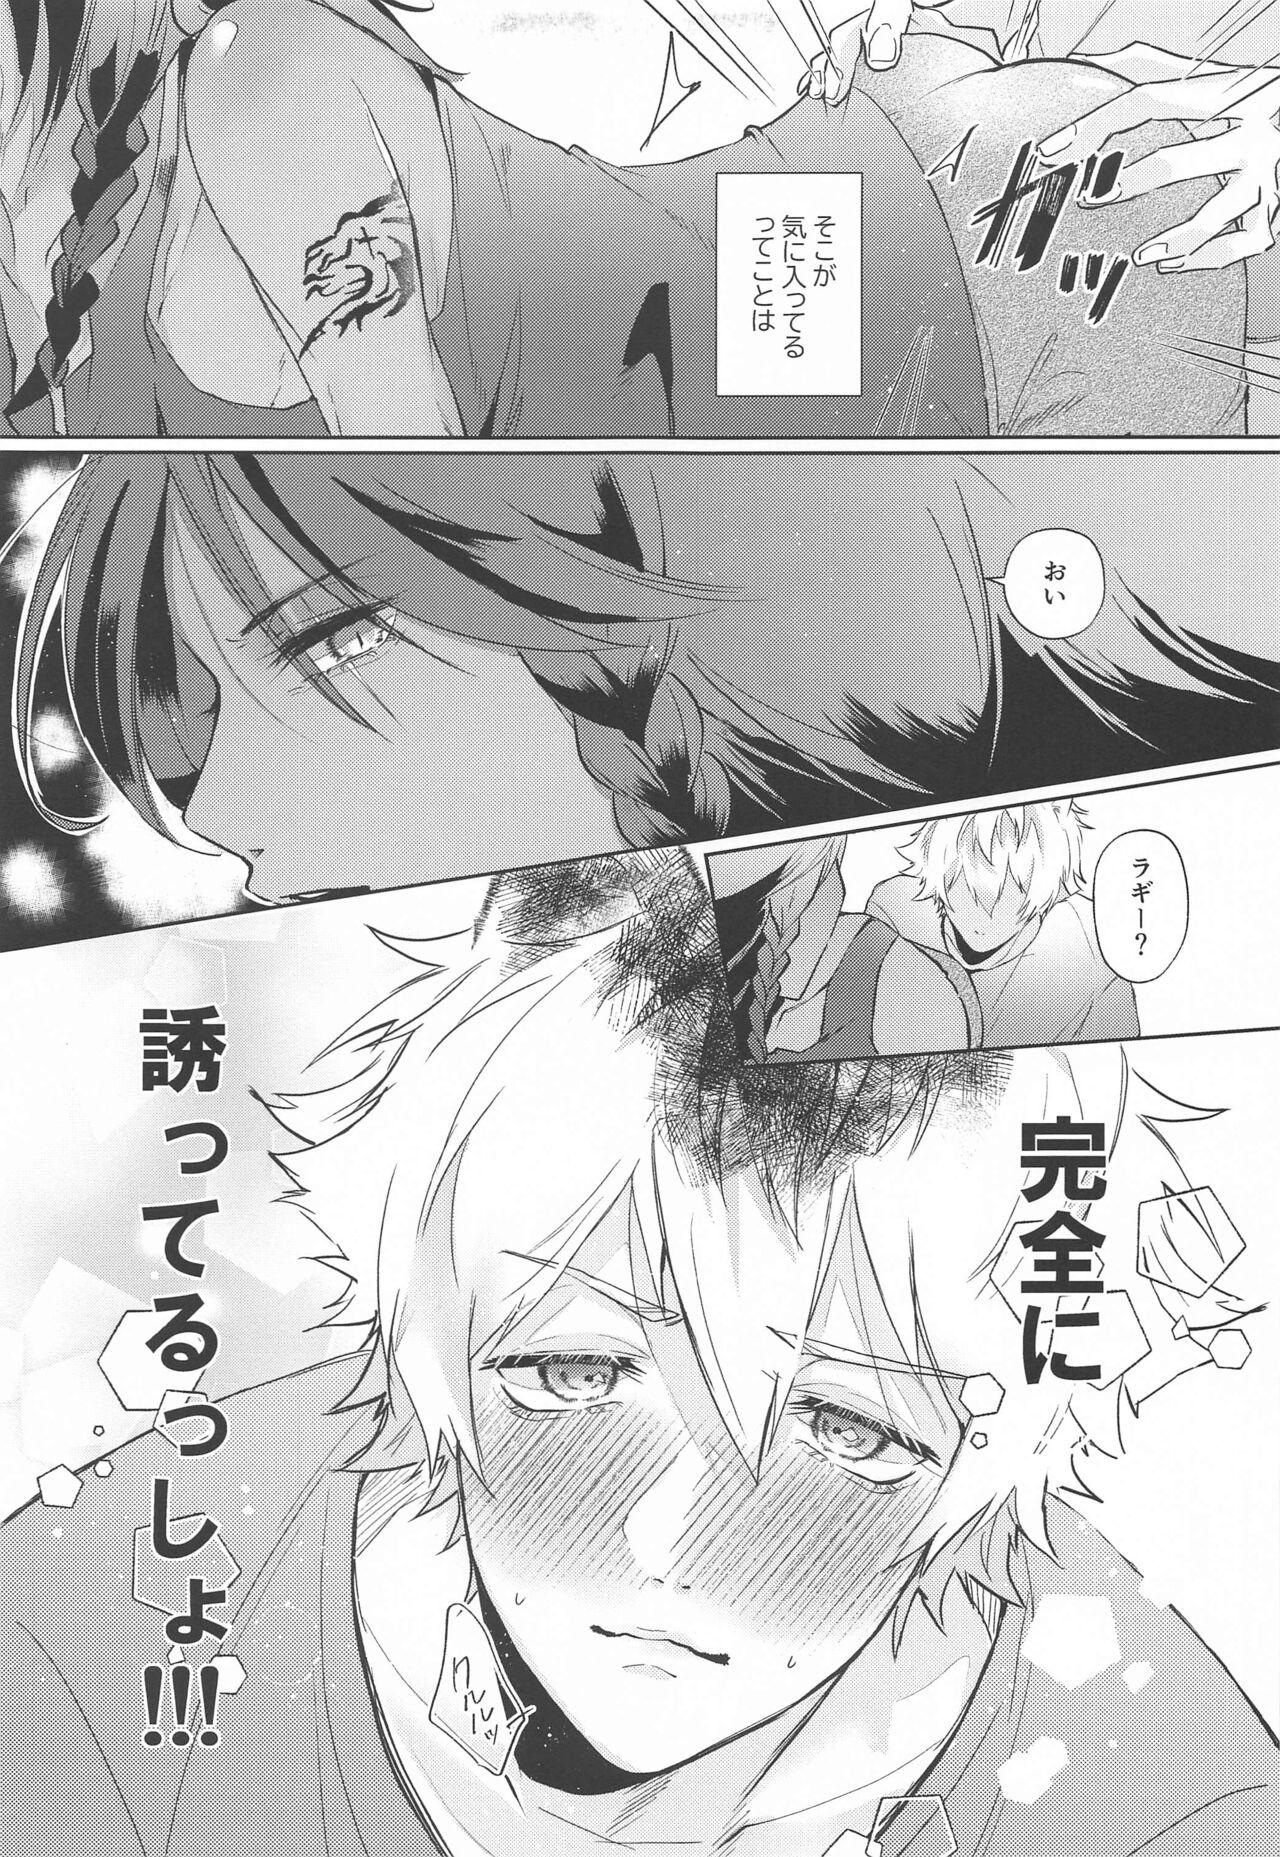 Gorgeous Kanchigai Over Run!! - over run from a misunderstanding - Disney twisted-wonderland Fisting - Page 10